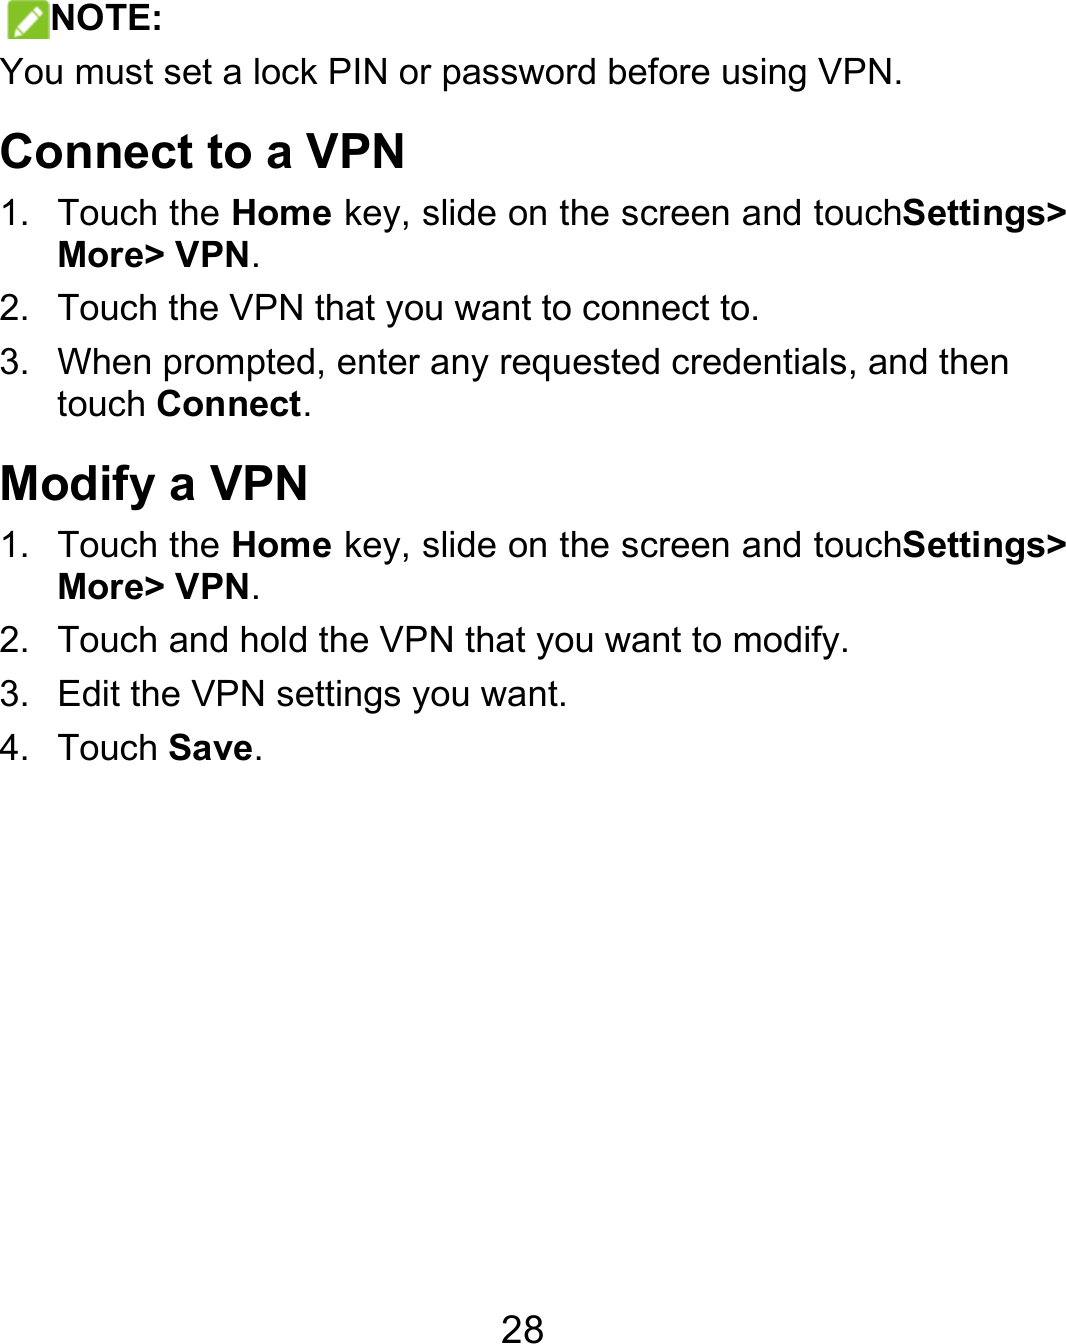  28 NOTE: You must set a lock PIN or password before using VPN.   Connect to a VPN 1. Touch the Home key, slide on the screen and touchSettings&gt; More&gt; VPN. 2.  Touch the VPN that you want to connect to. 3.  When prompted, enter any requested credentials, and then touch Connect.  Modify a VPN 1. Touch the Home key, slide on the screen and touchSettings&gt; More&gt; VPN. 2.  Touch and hold the VPN that you want to modify. 3.  Edit the VPN settings you want. 4. Touch Save.  